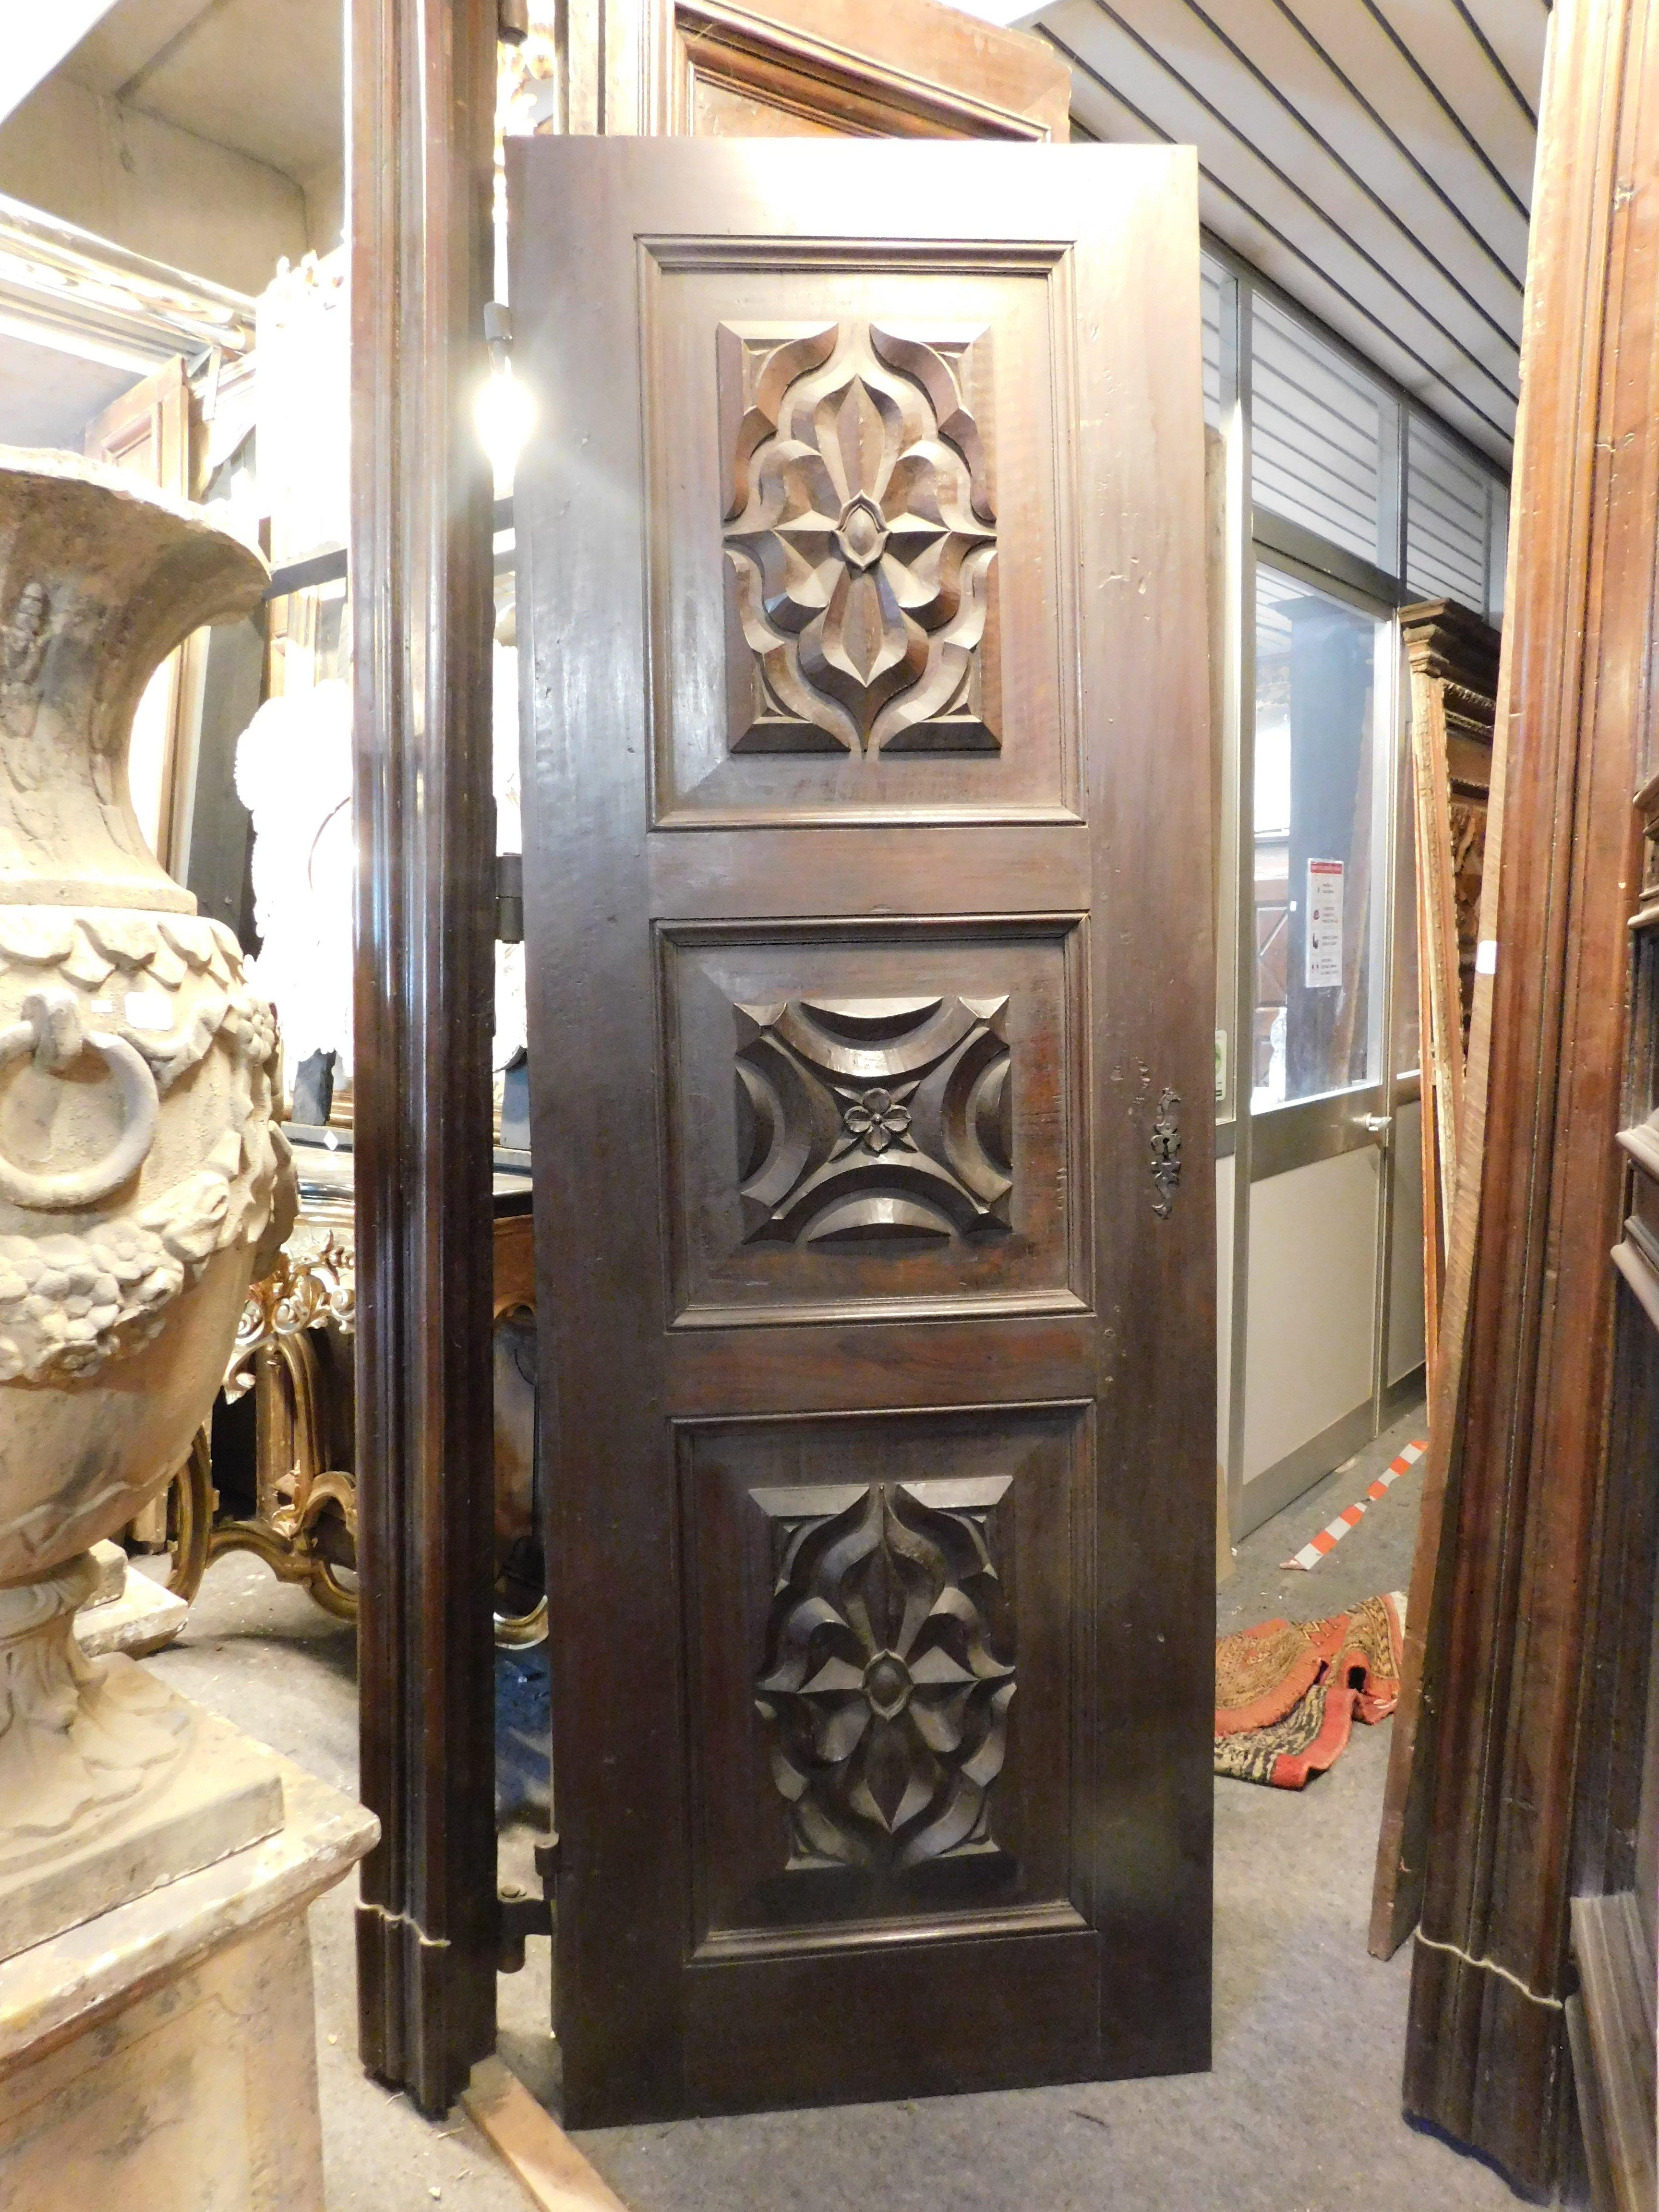 N.4 ancient antique single doors in precious solid walnut wood, richly hand-carved with baroque cobweb tiles, built by a craftsman from the 1600s in Italy for an important noble palace.
Smooth back to be finished but with original butterfly needles,